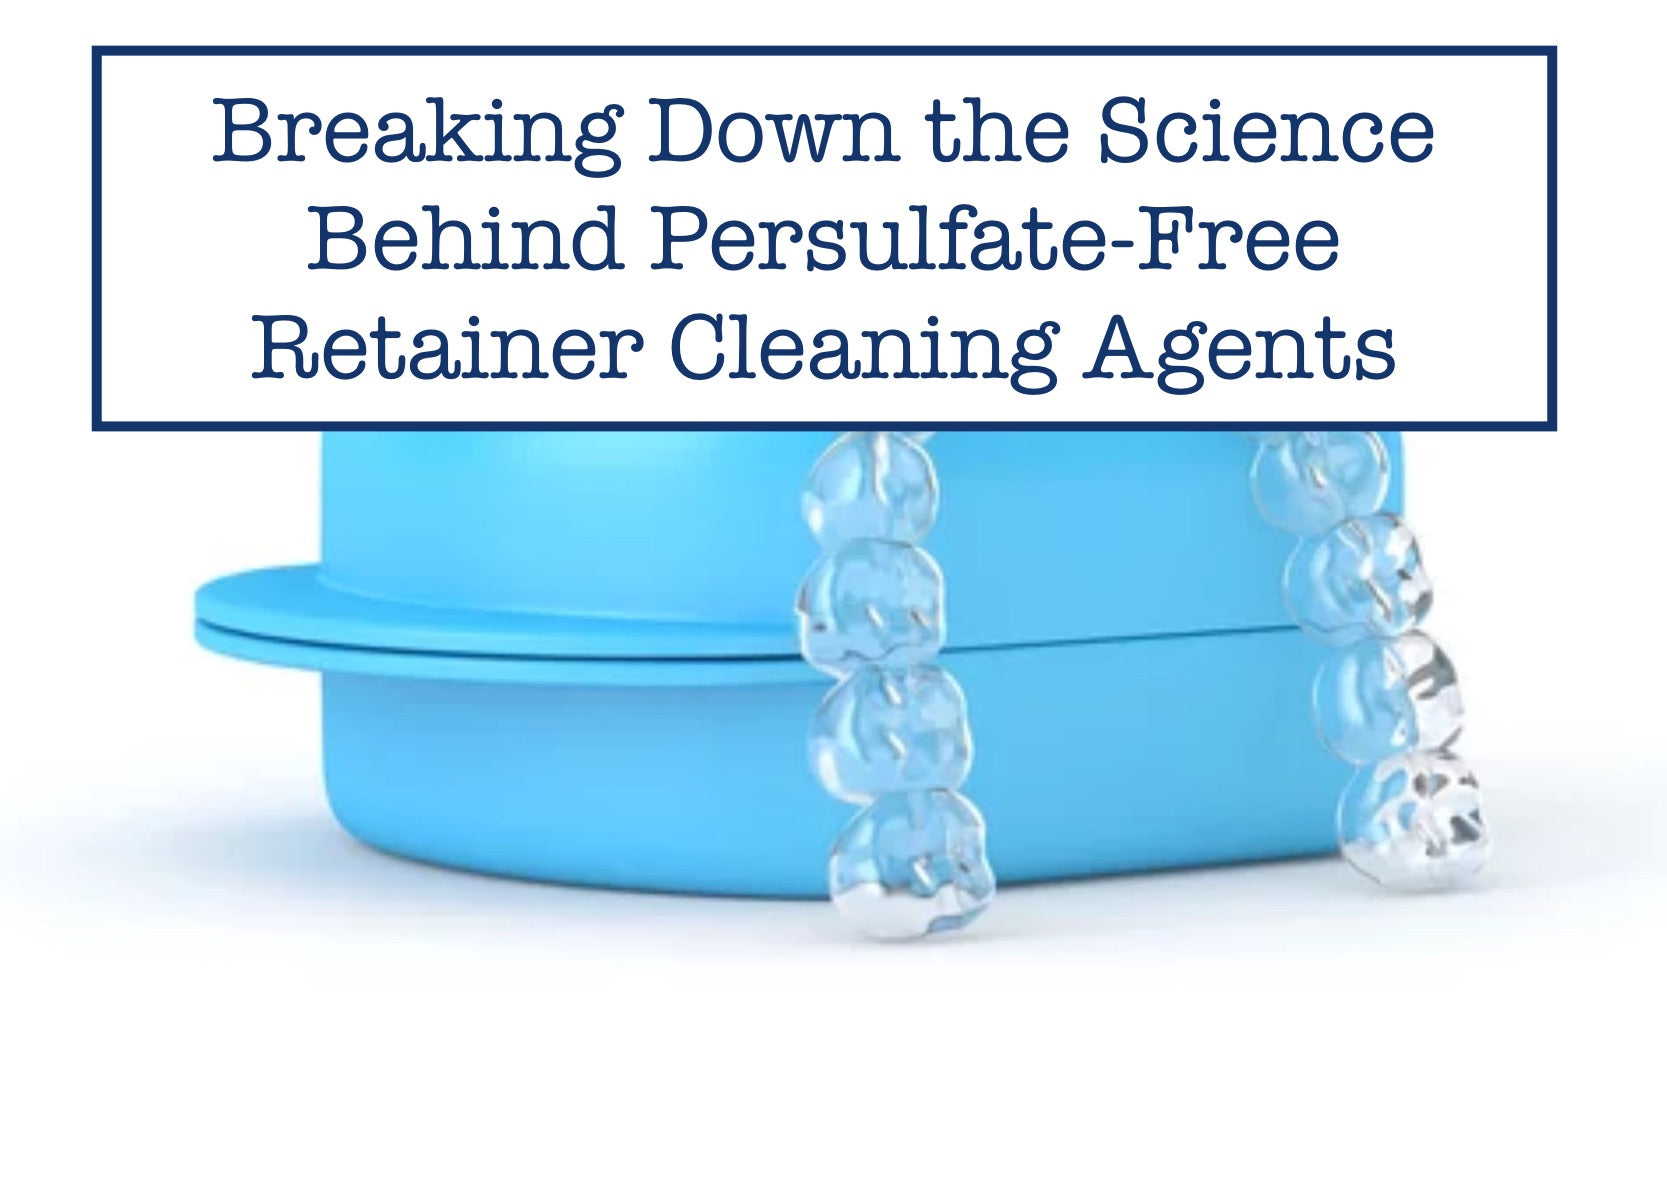 Breaking Down the Science Behind Persulfate-Free Retainer Cleaning Agents